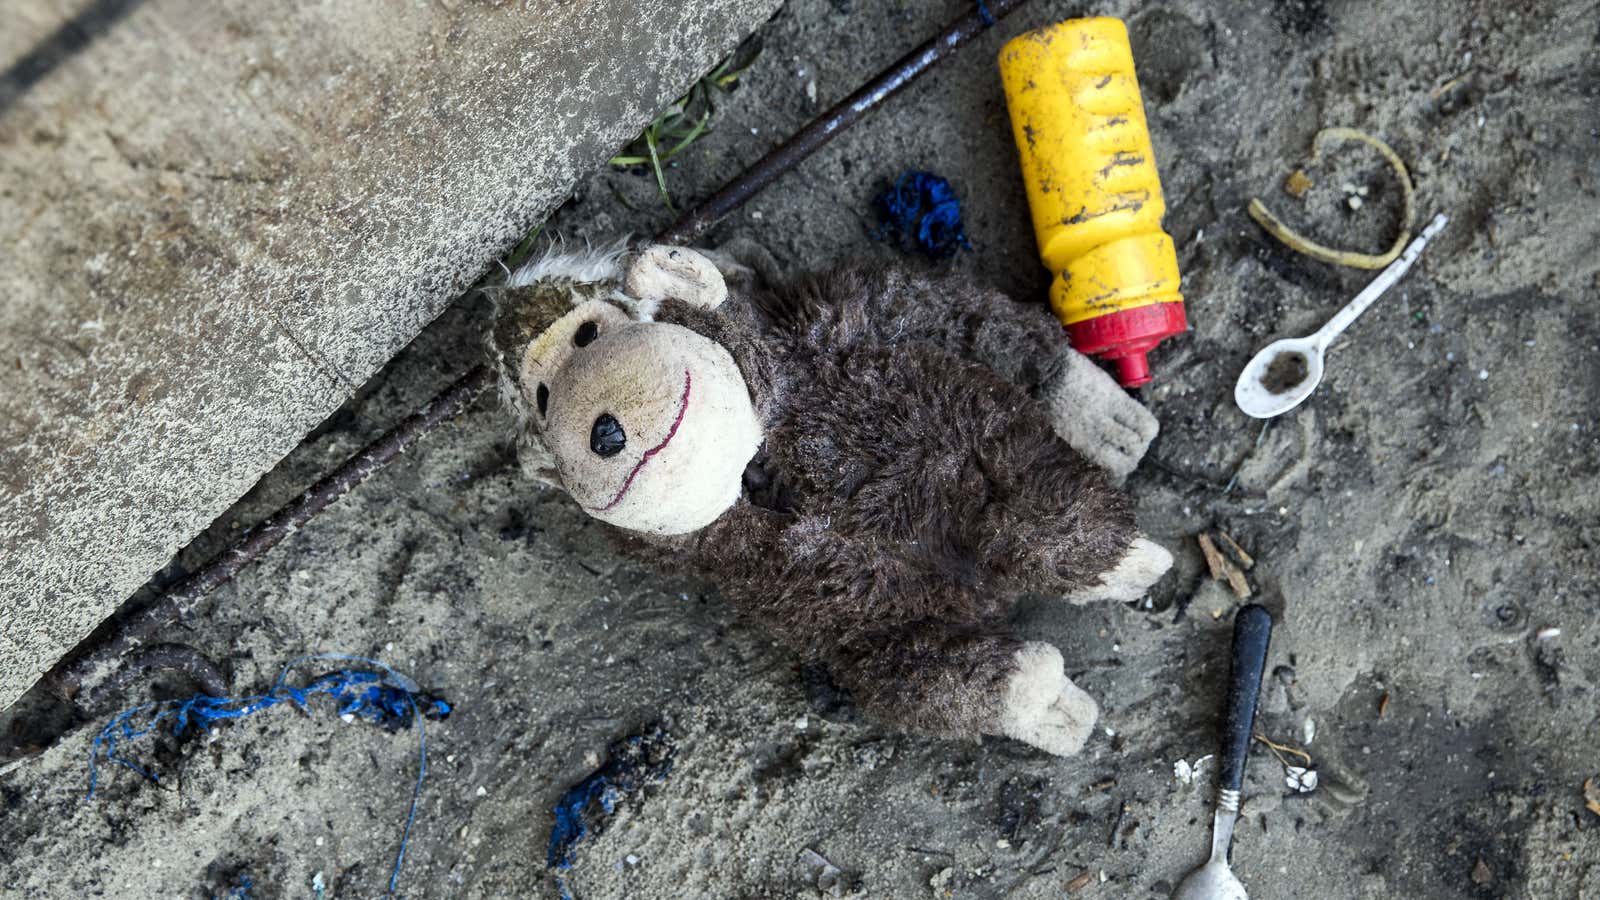 A plush toy lies on the ground after migrants fled the makeshift camp ‘The Jungle’ following the outbreak of a fire during dismantling operations a day earlier, in Calais on Oct. 27.